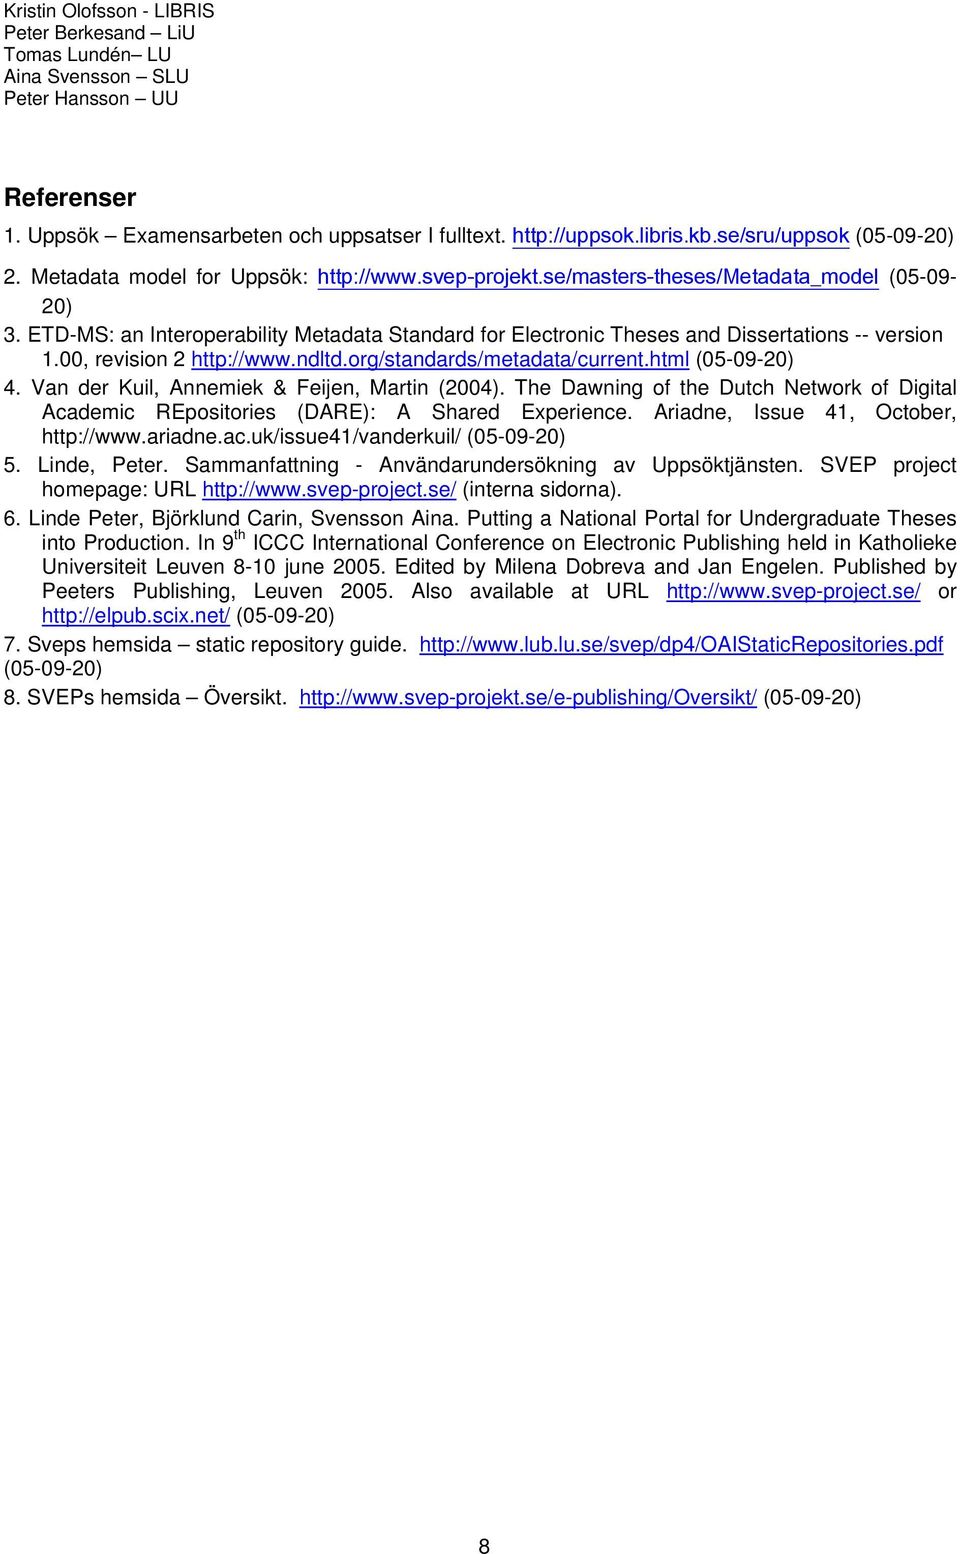 ETD-MS: an Interoperability Metadata Standard for Electronic Theses and Dissertations -- version 1.00, revision 2 http://www.ndltd.org/standards/metadata/current.html (05-09-20) 4.